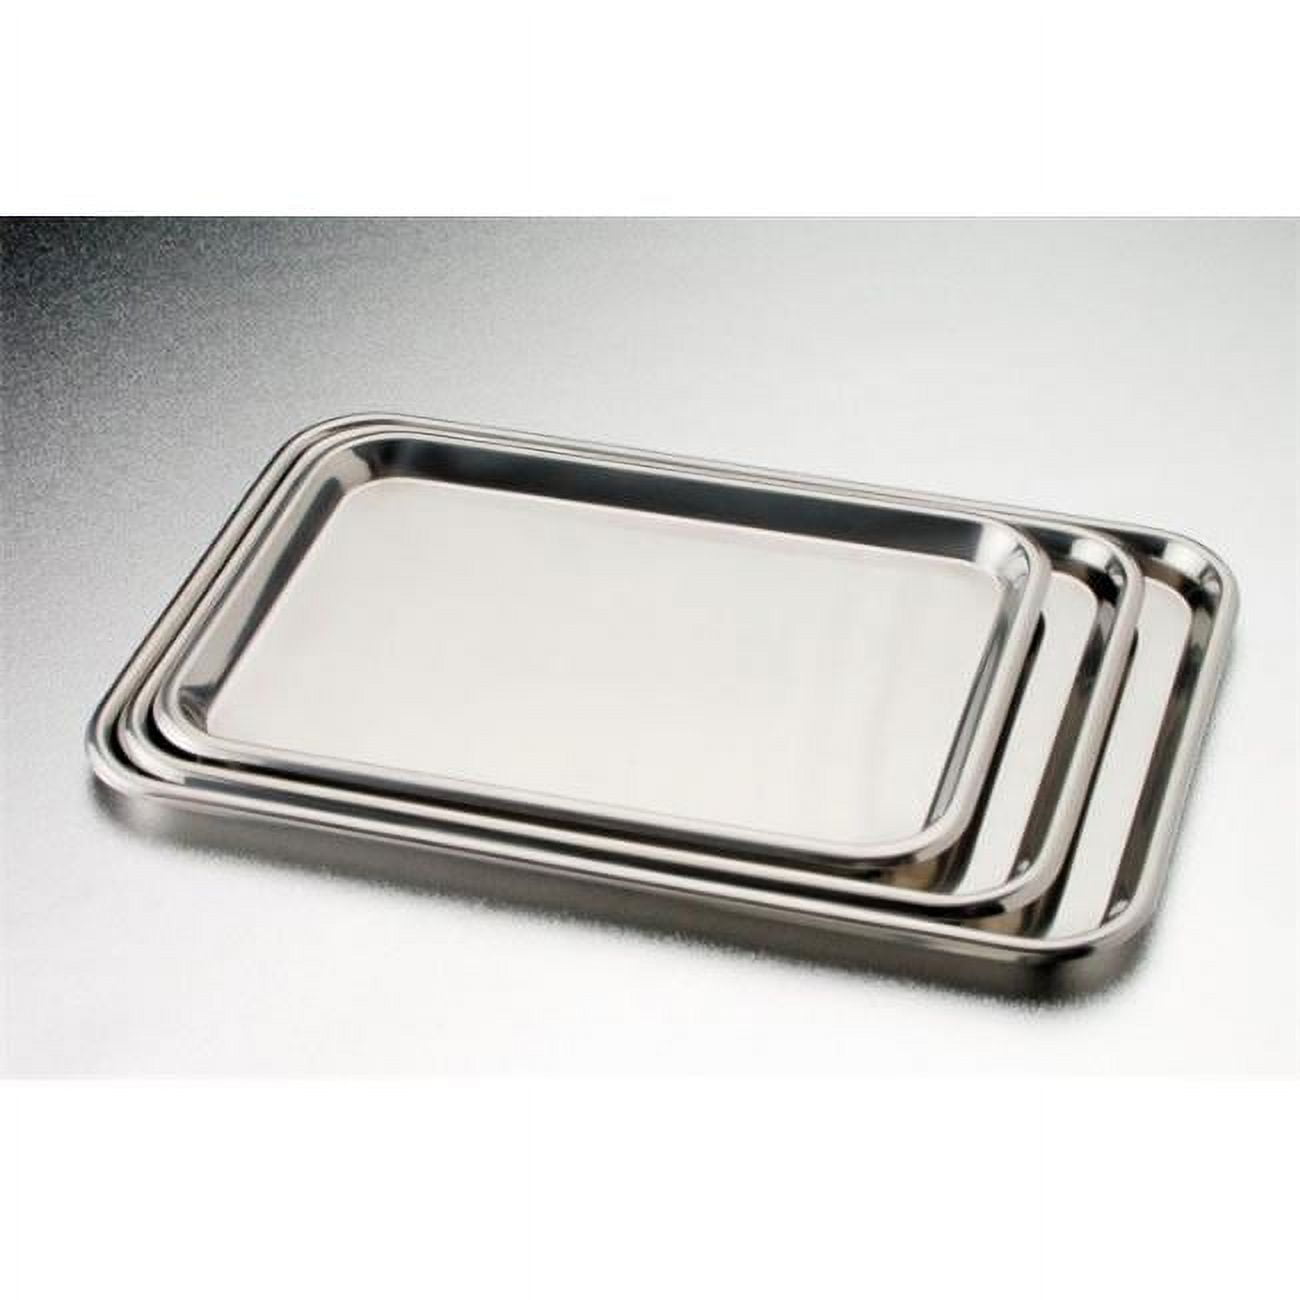 4266 16.75 X 10.25 X 0.5 In. Stainless Steel Replacement Tray, Large